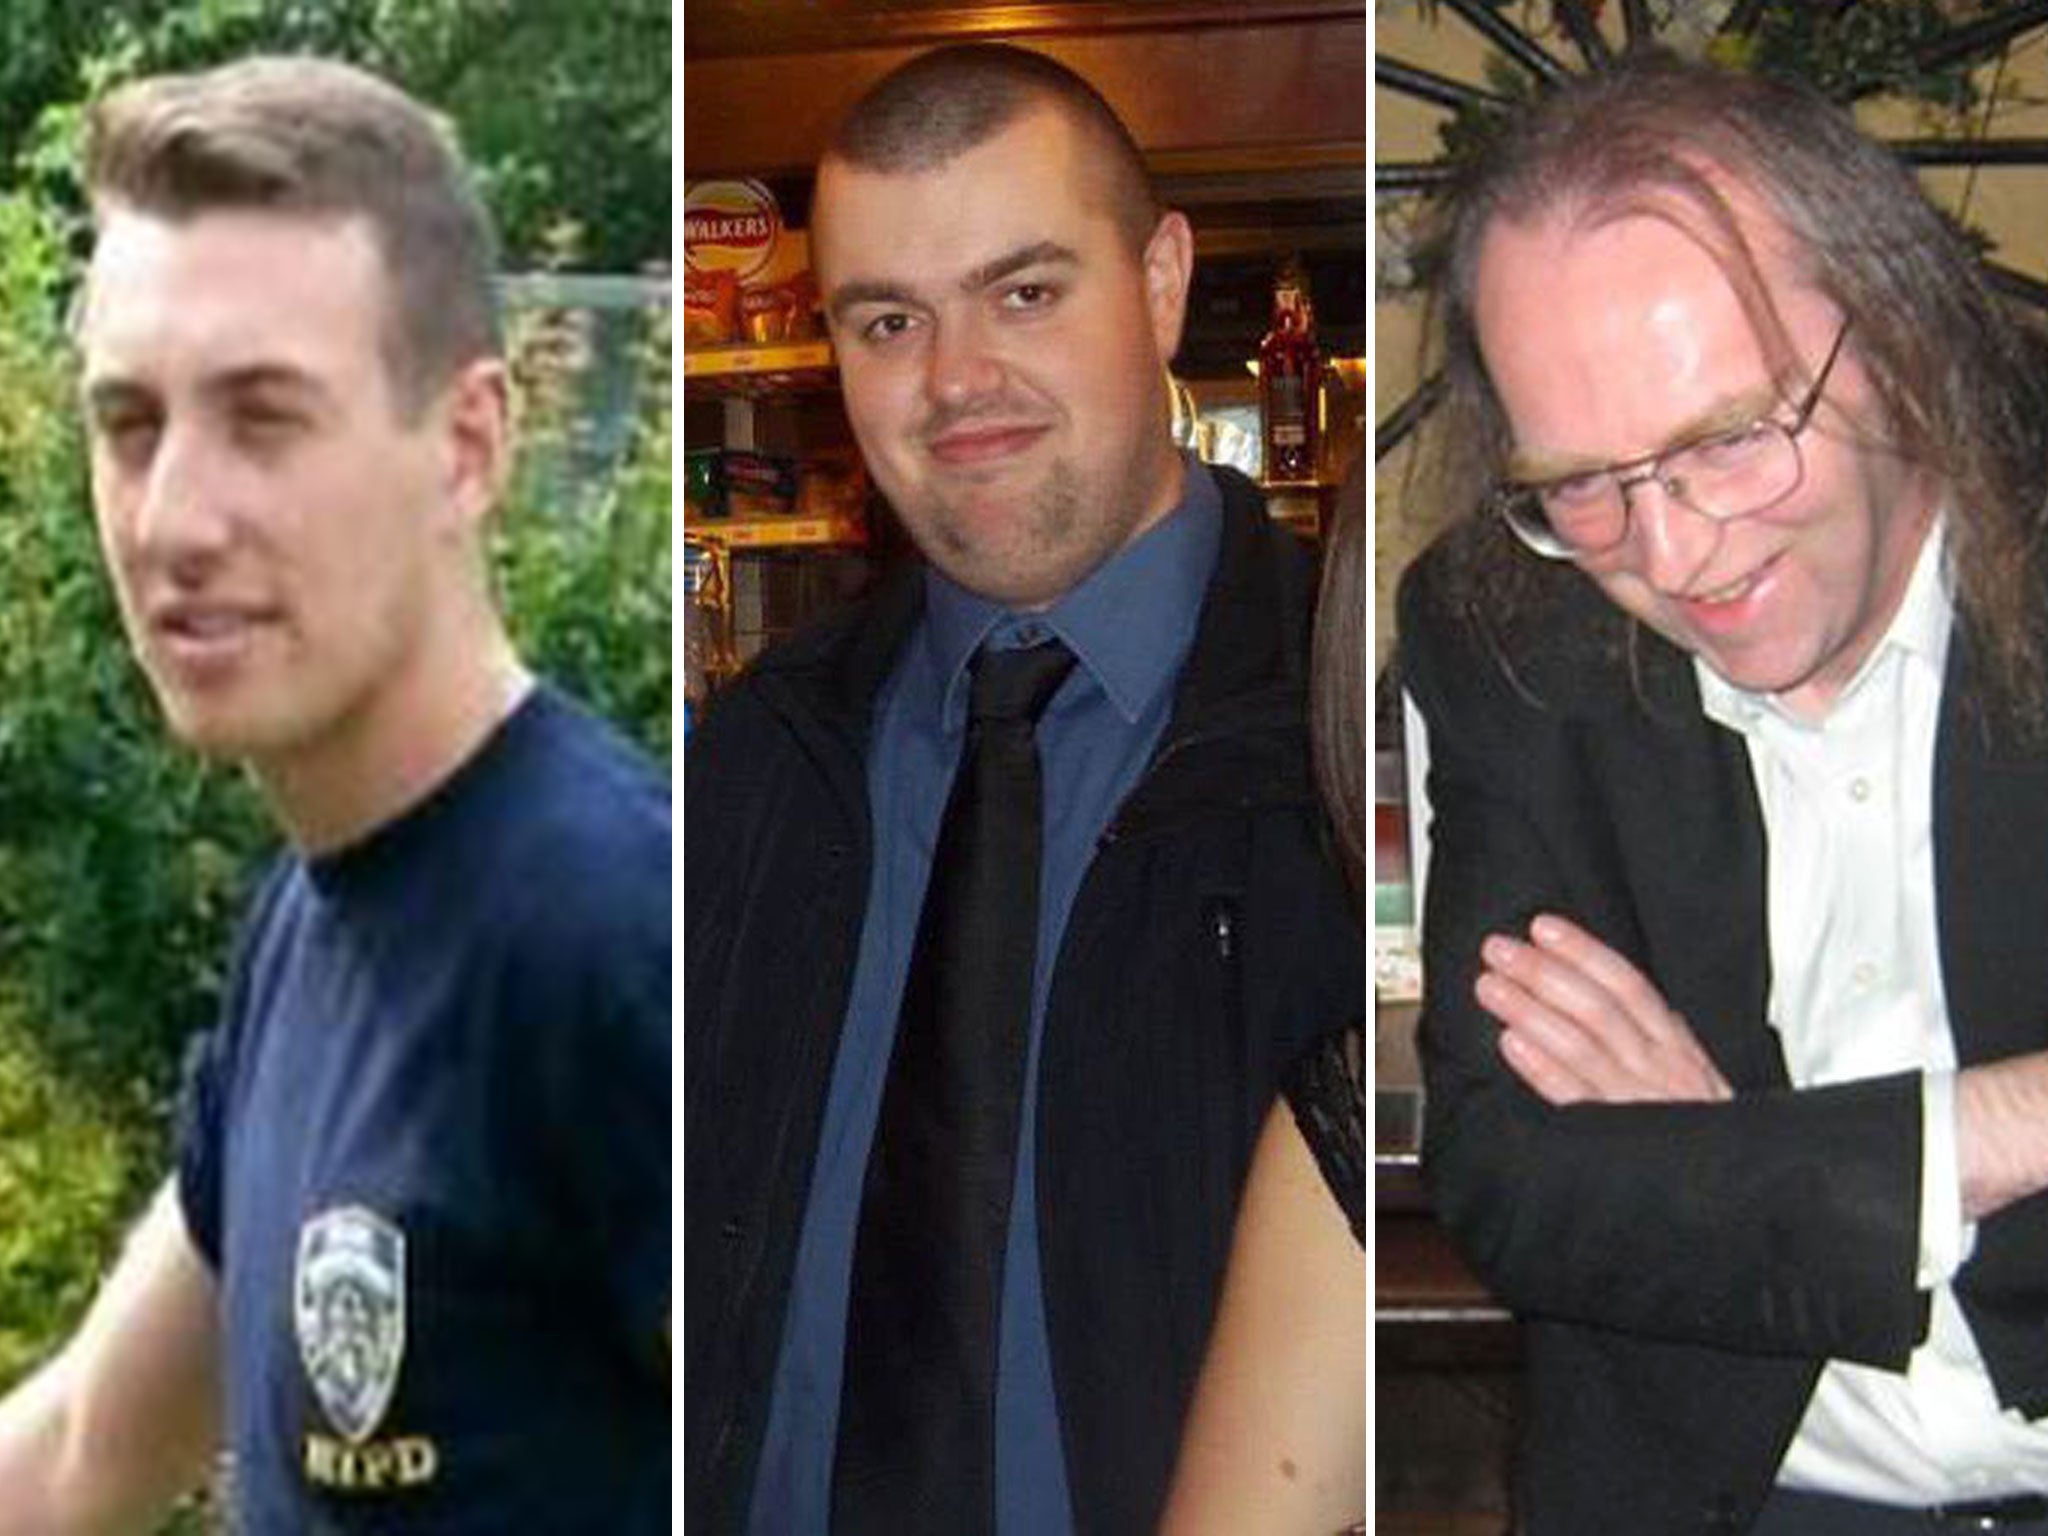 Victims of the crash: (from left to right) Ben Pocock, Liam Sweeney and John Alder